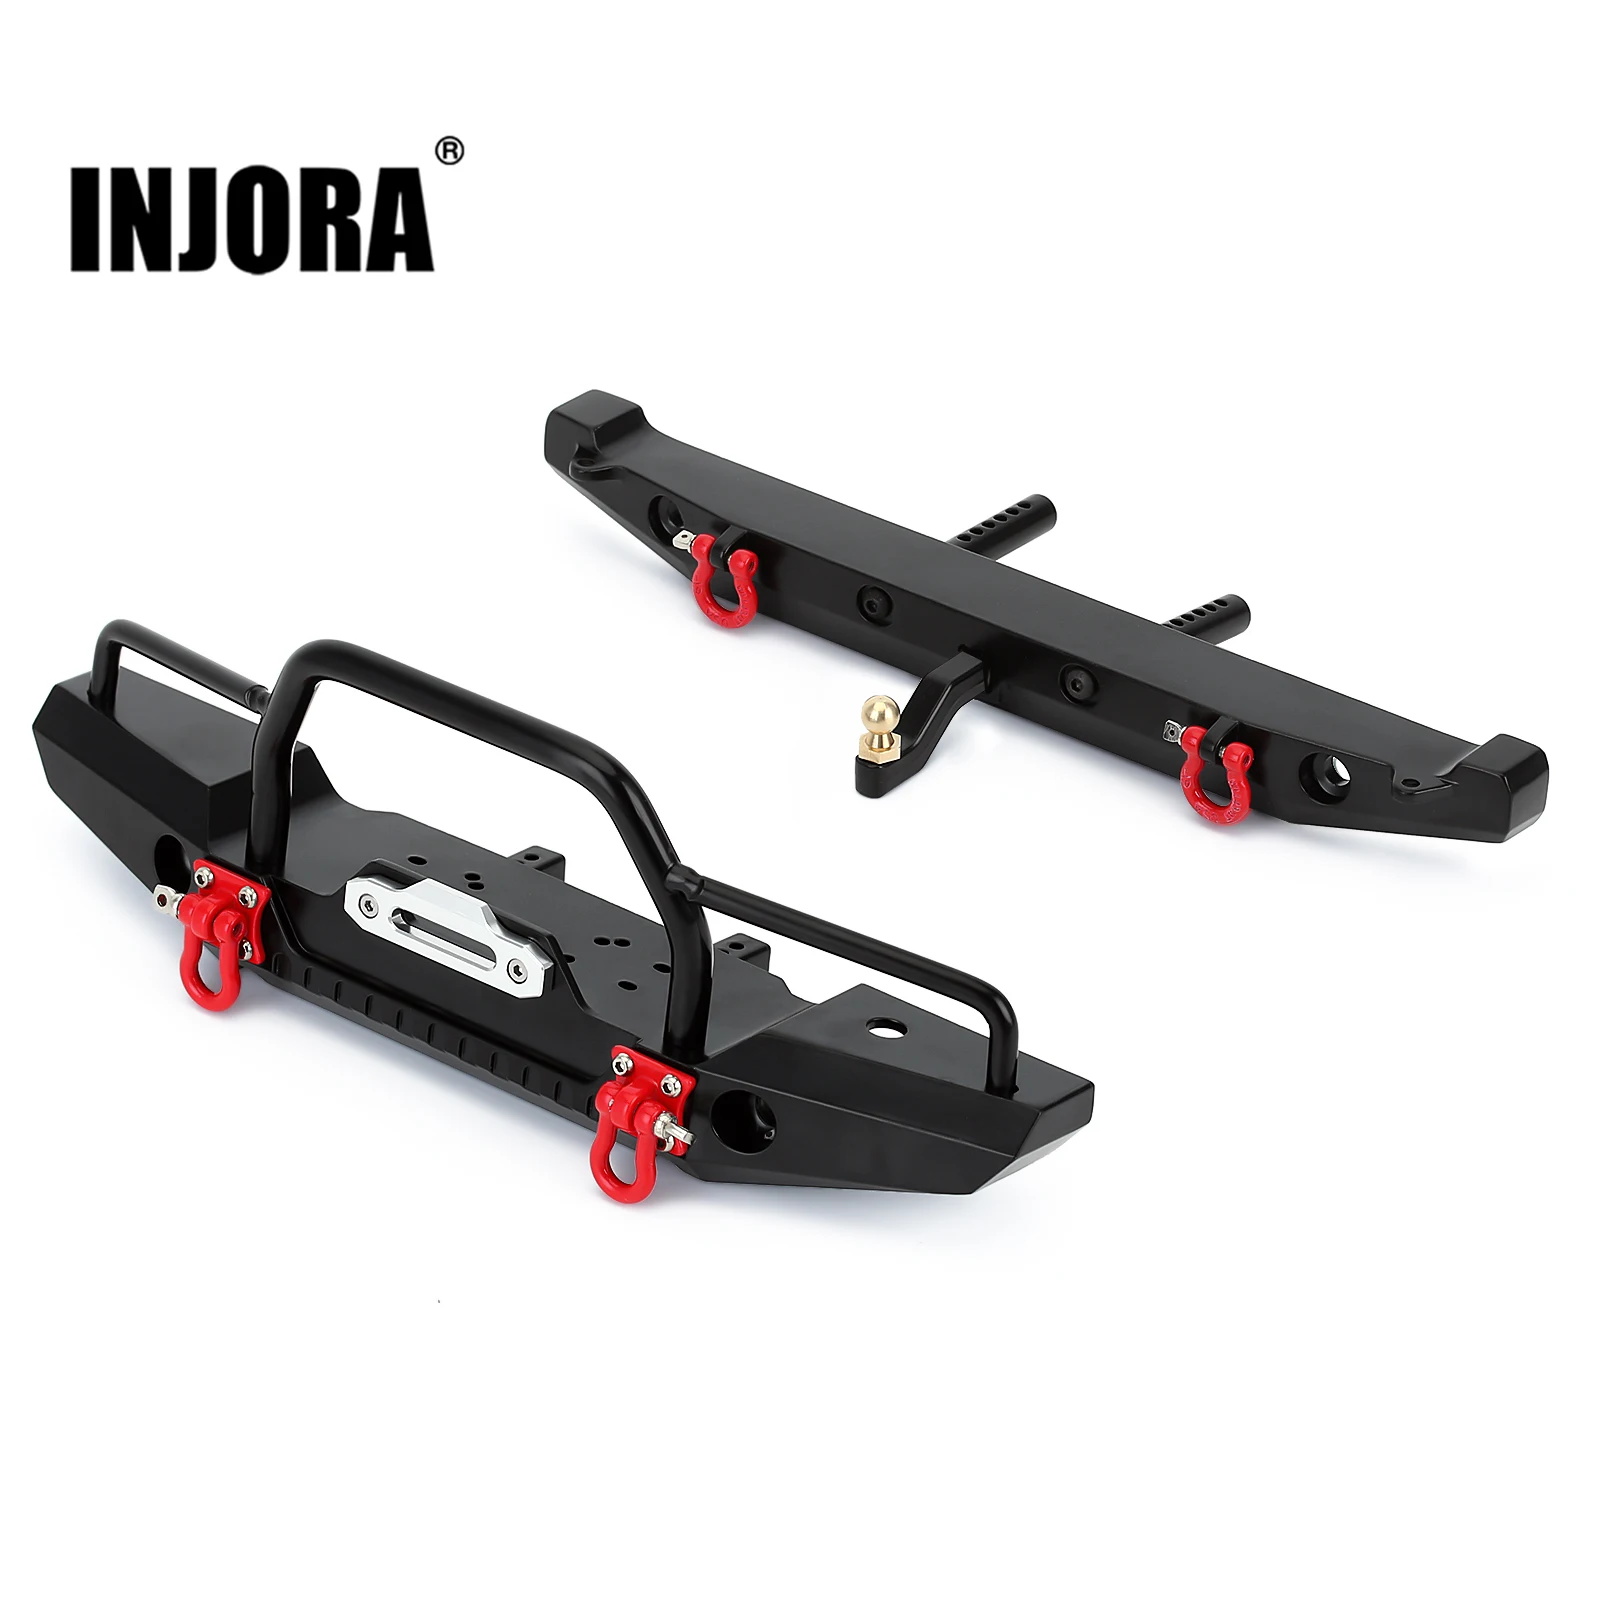 INJORA Metal Front Rear Bumper with Led Lights for 1/10 RC Crawler Axial SCX10 & SCX10 II 90046 90047 Upgrade Parts